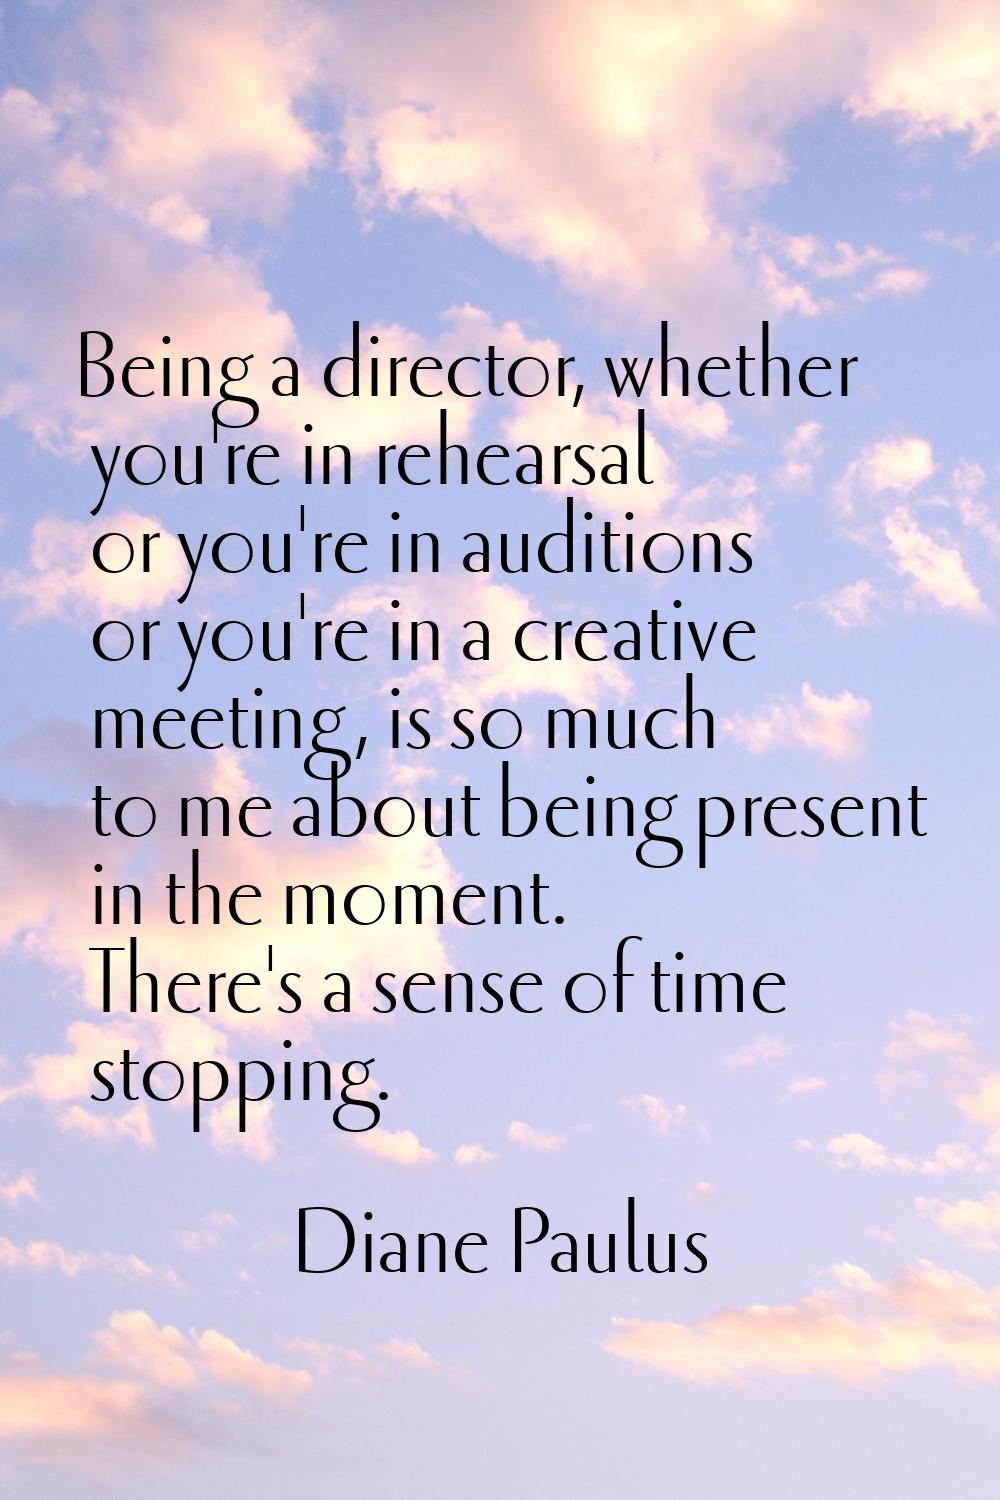 Being a director, whether you're in rehearsal or you're in auditions or you're in a creative meetin